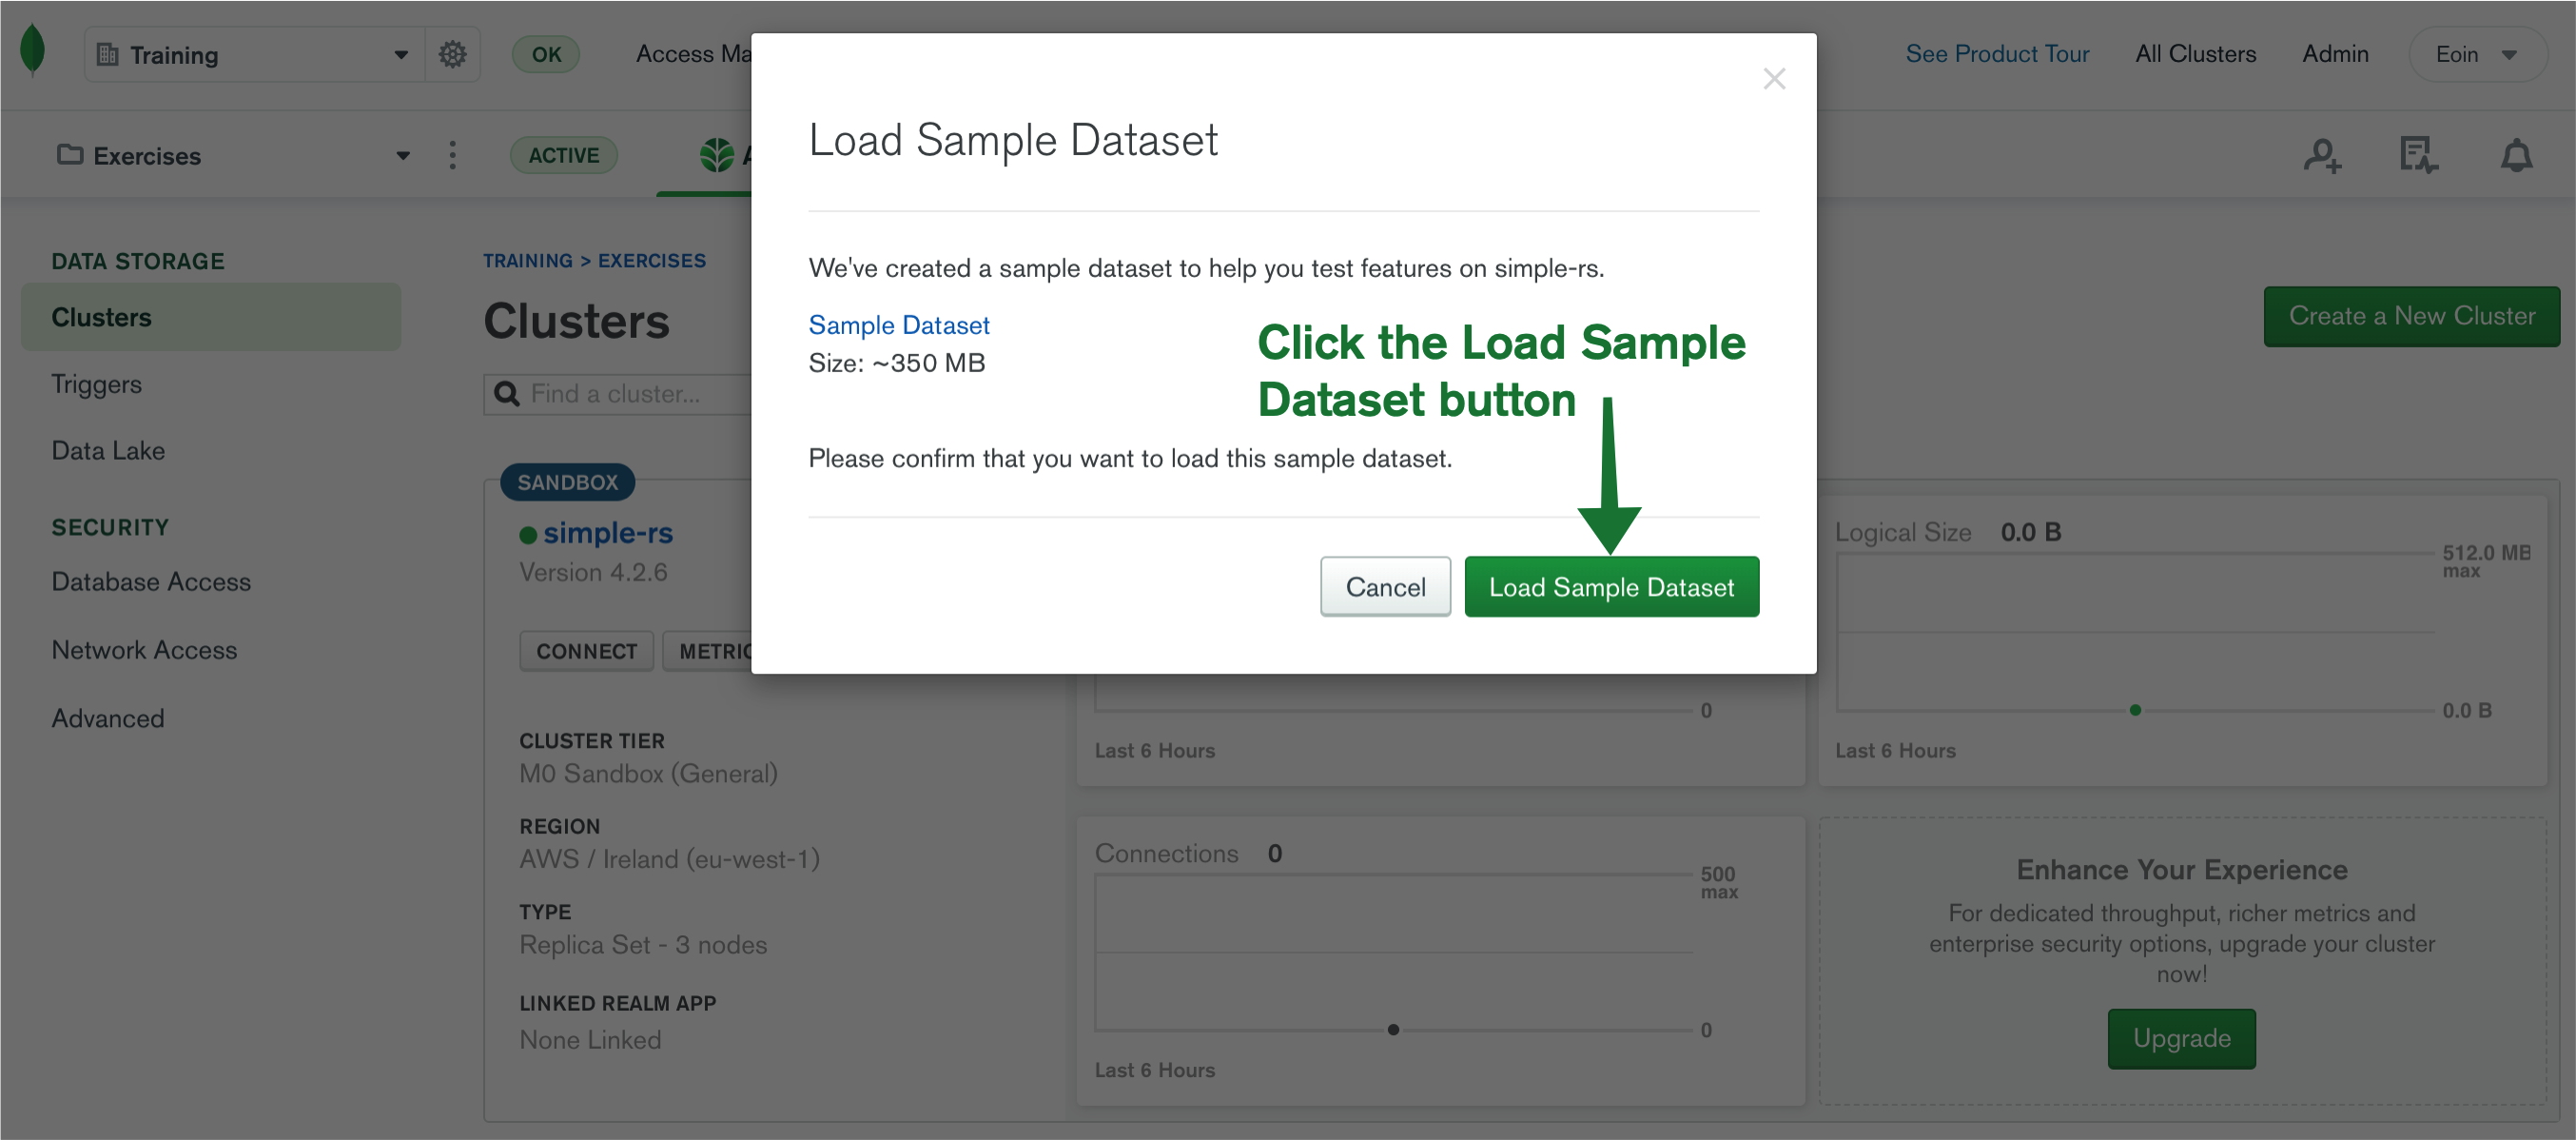 Click the button "Load Sample Dataset"